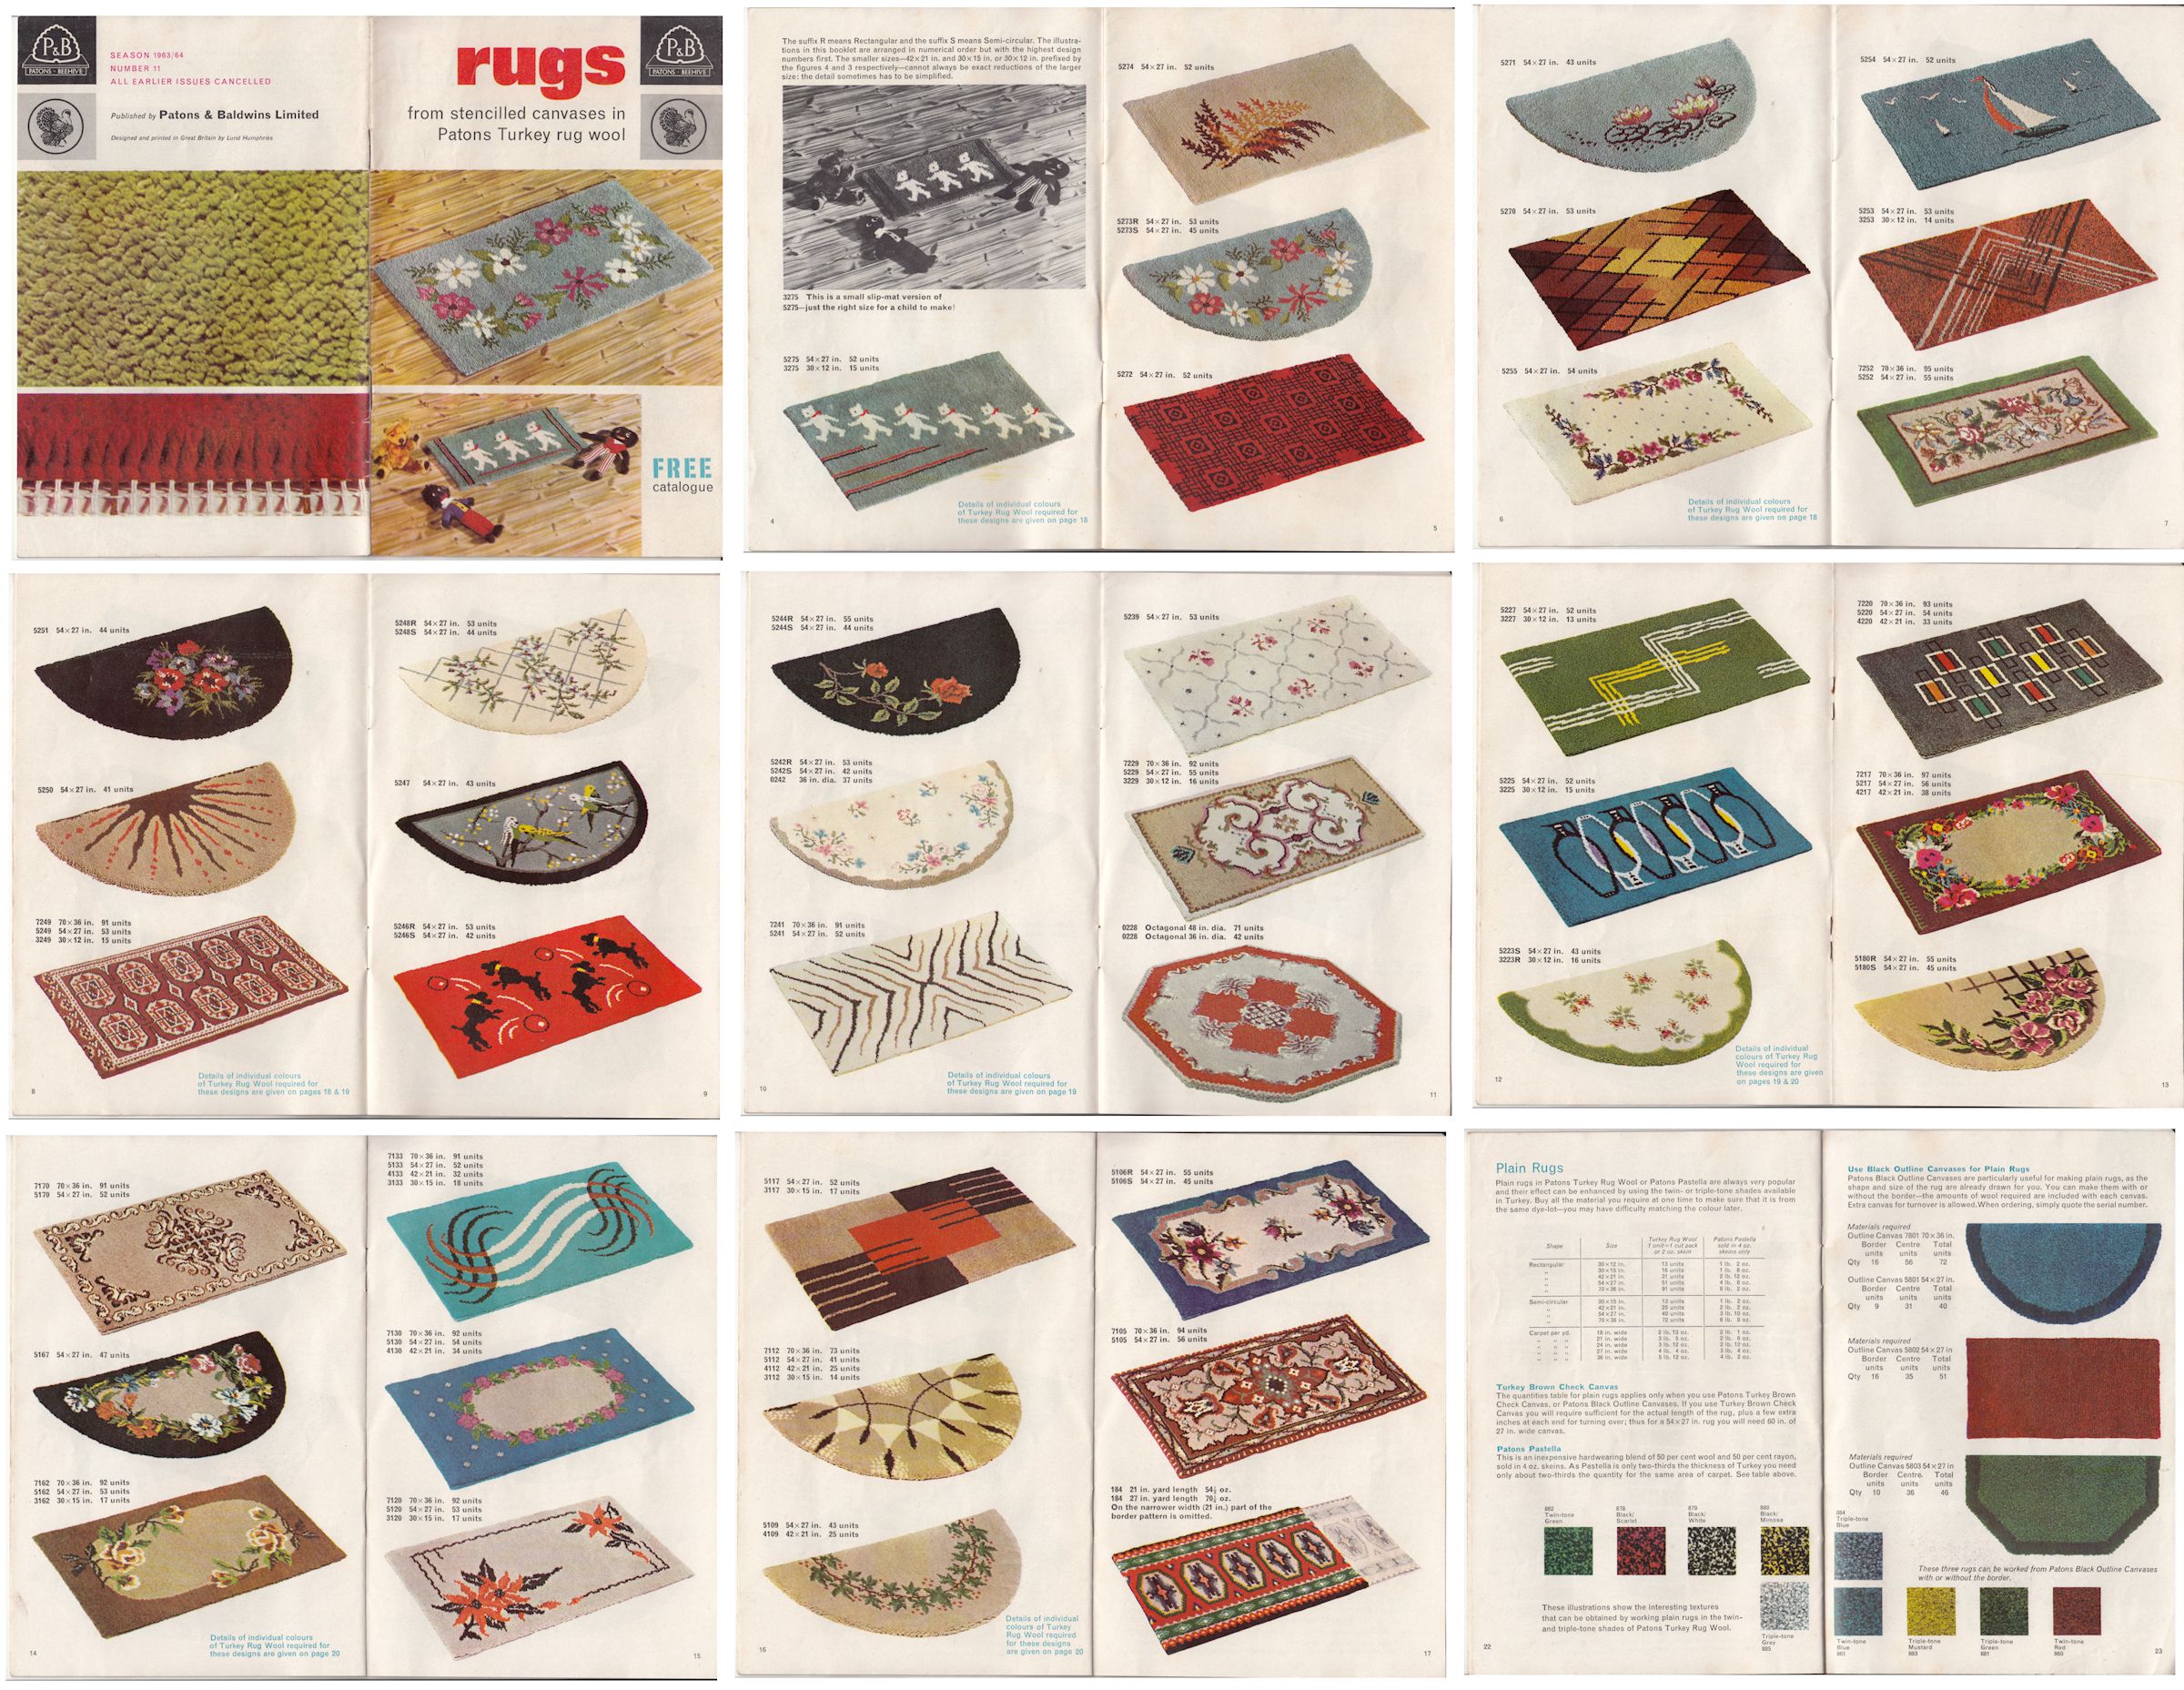 patons rugs issue 11 1963-64